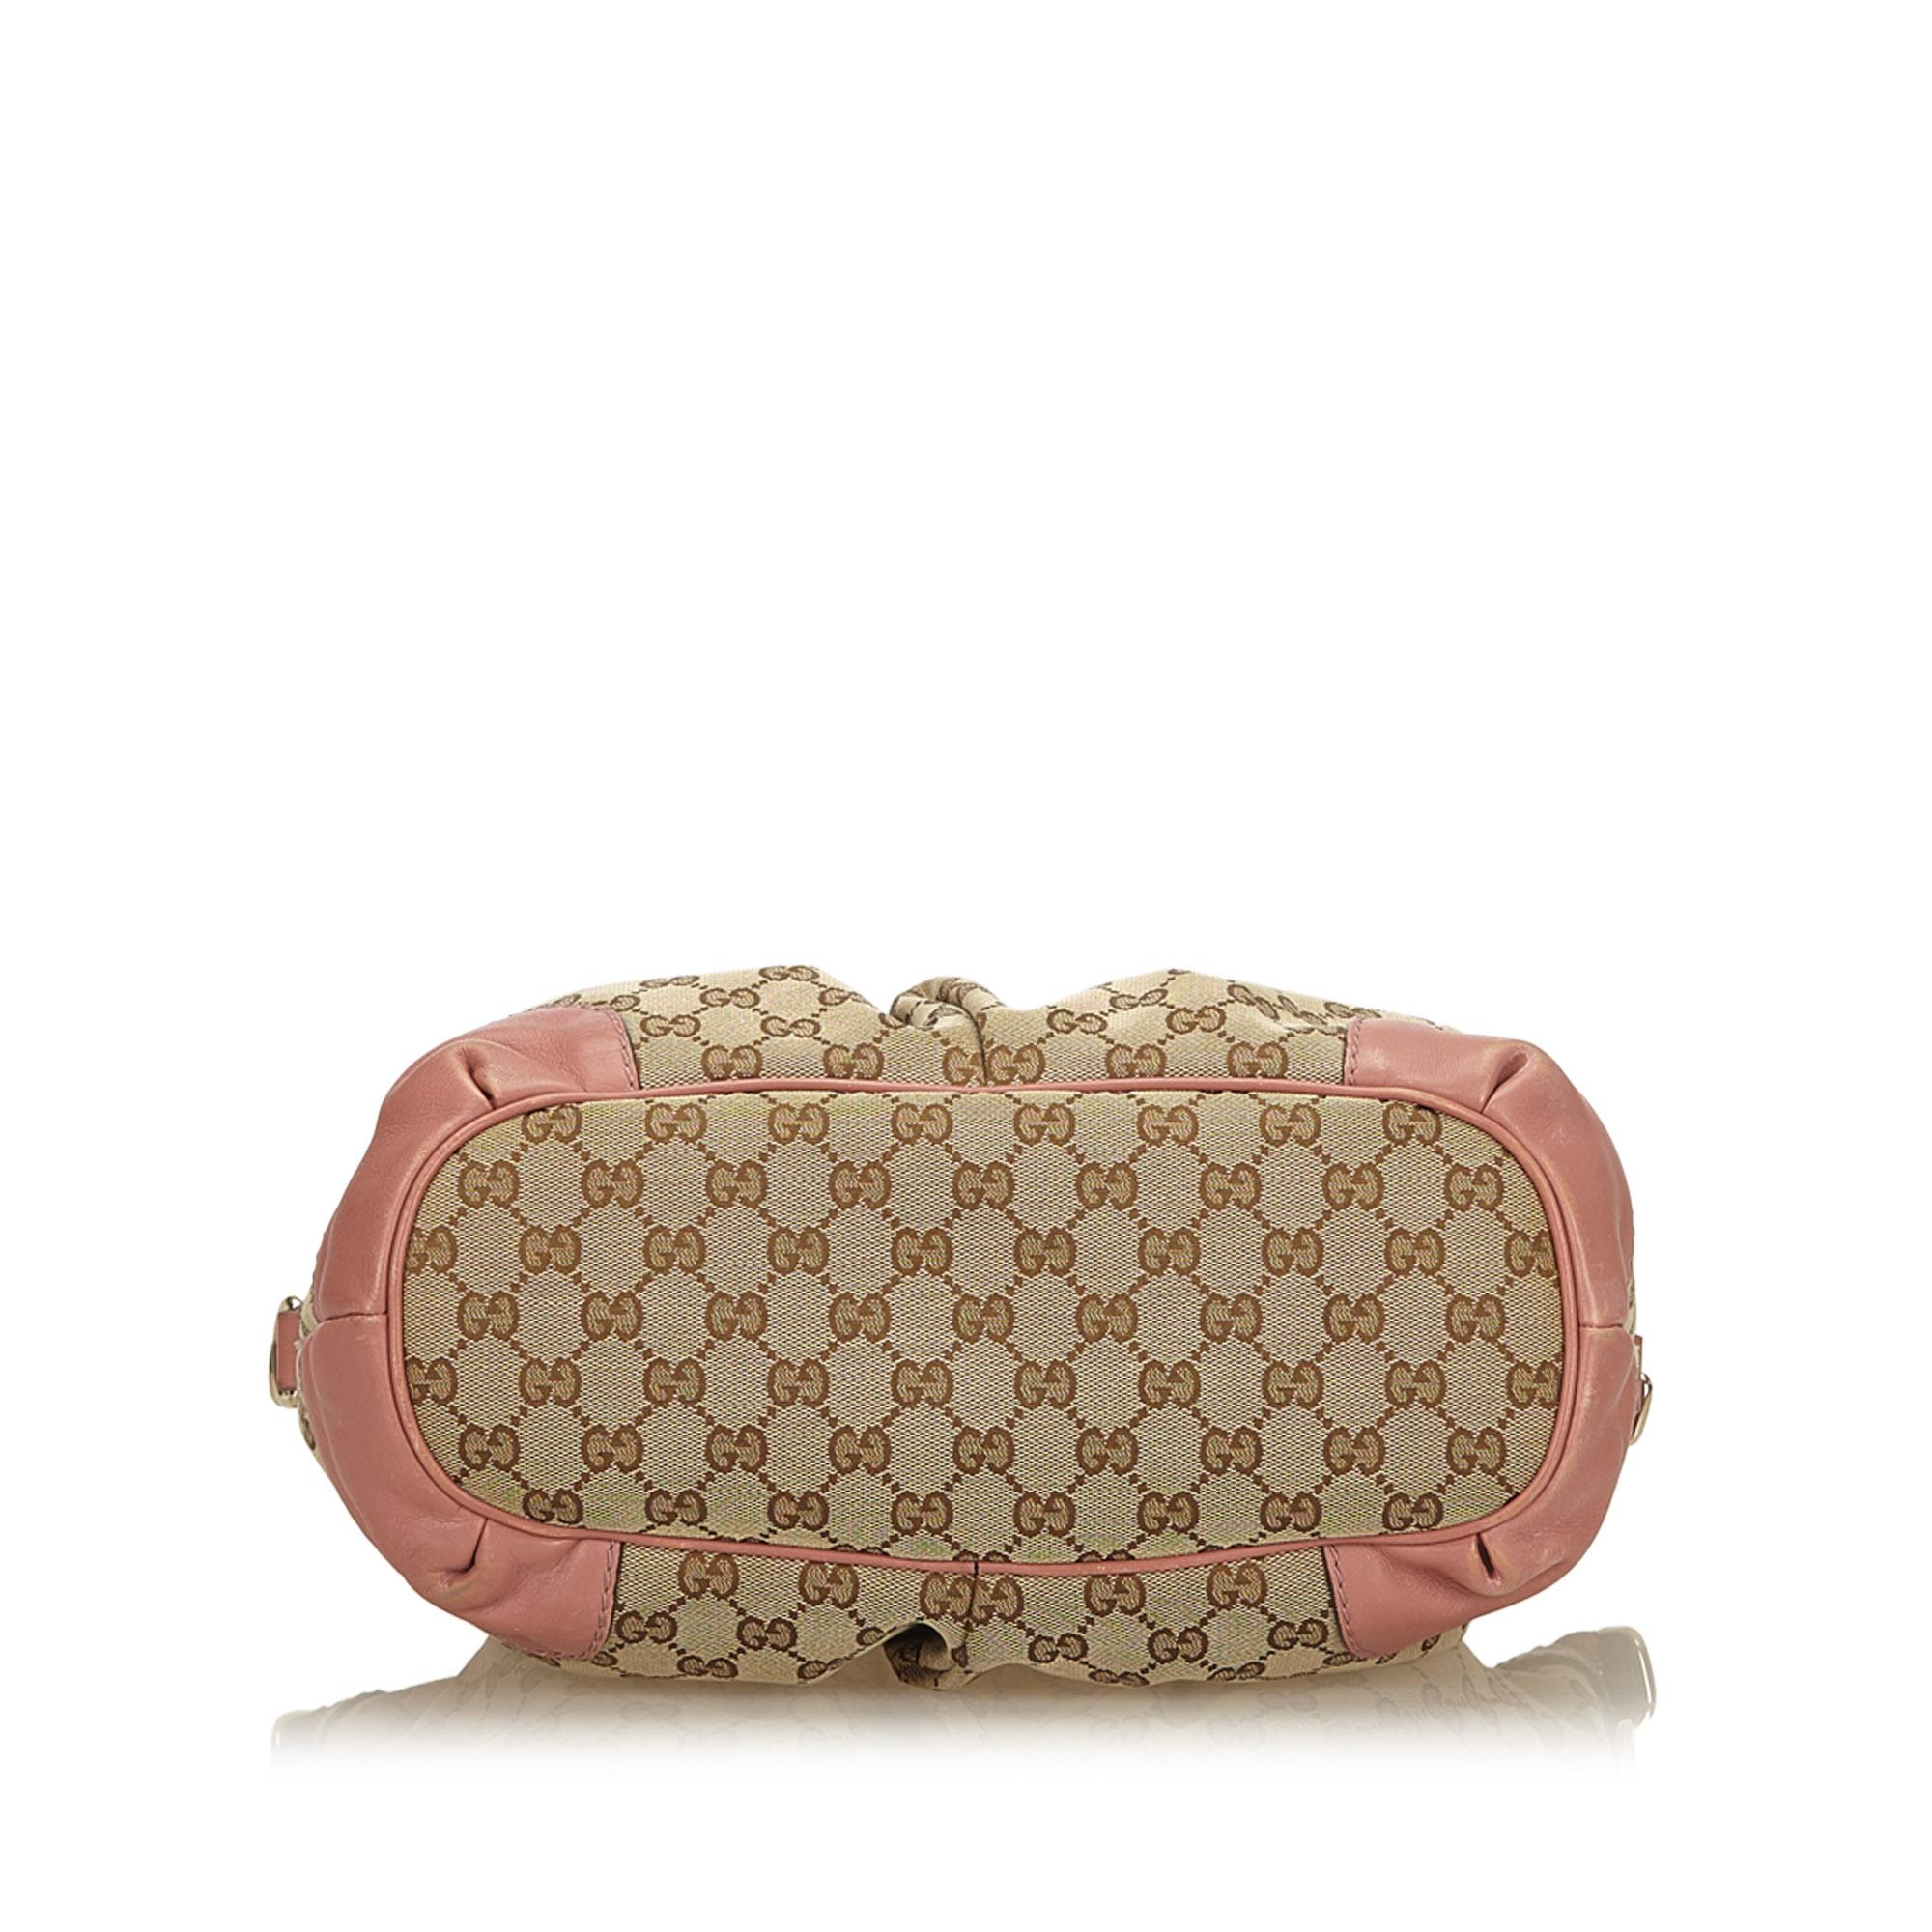 Women's or Men's Gucci Brown x Pink Guccissima Jacquard Satchel